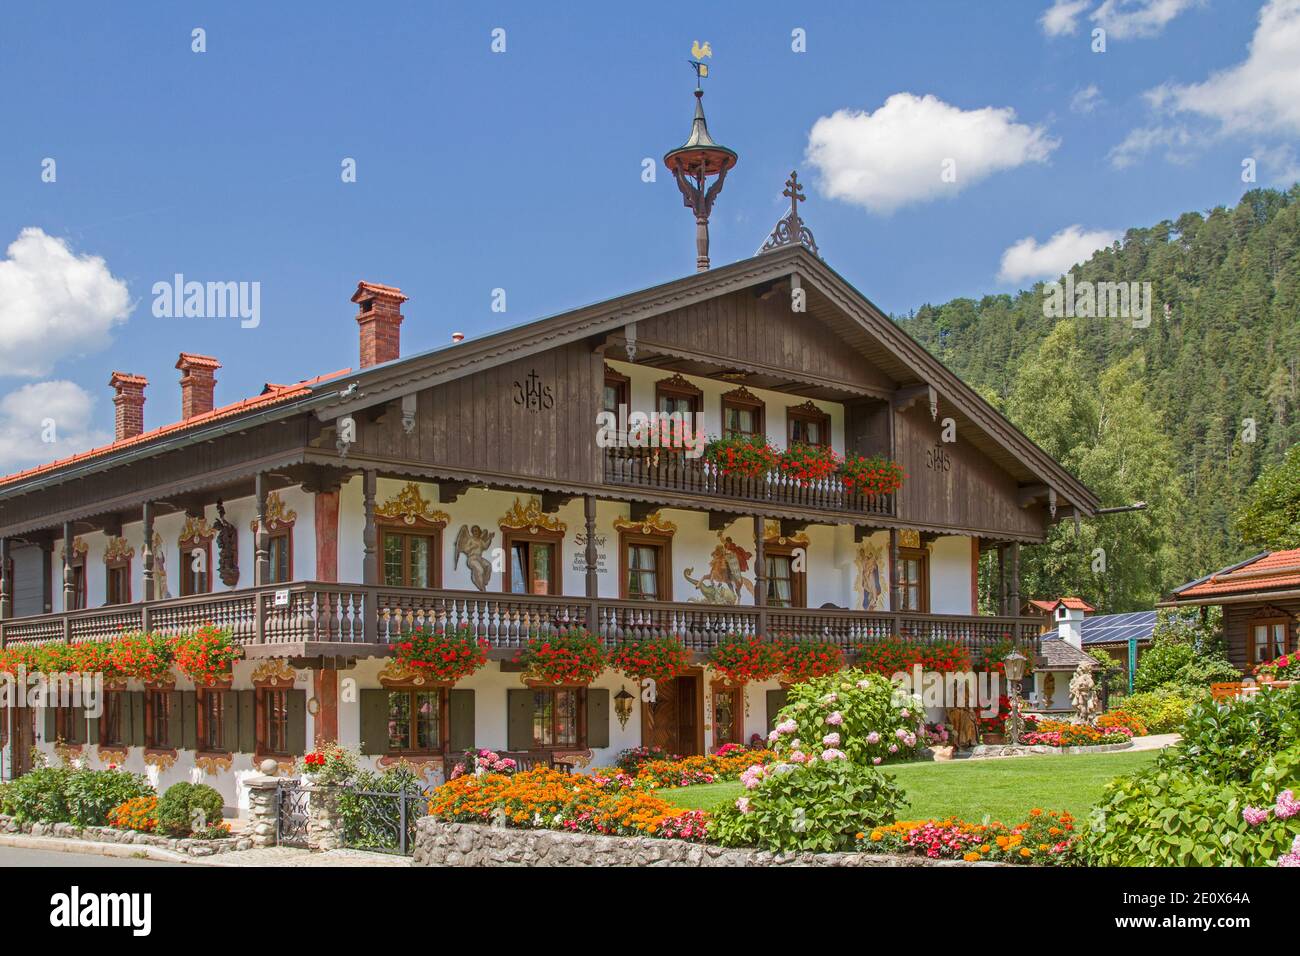 The Streinhof In Bayrischzell Is A Prime Example Of The Alpine Architectural Style In Southern Upper Bavaria Stock Photo